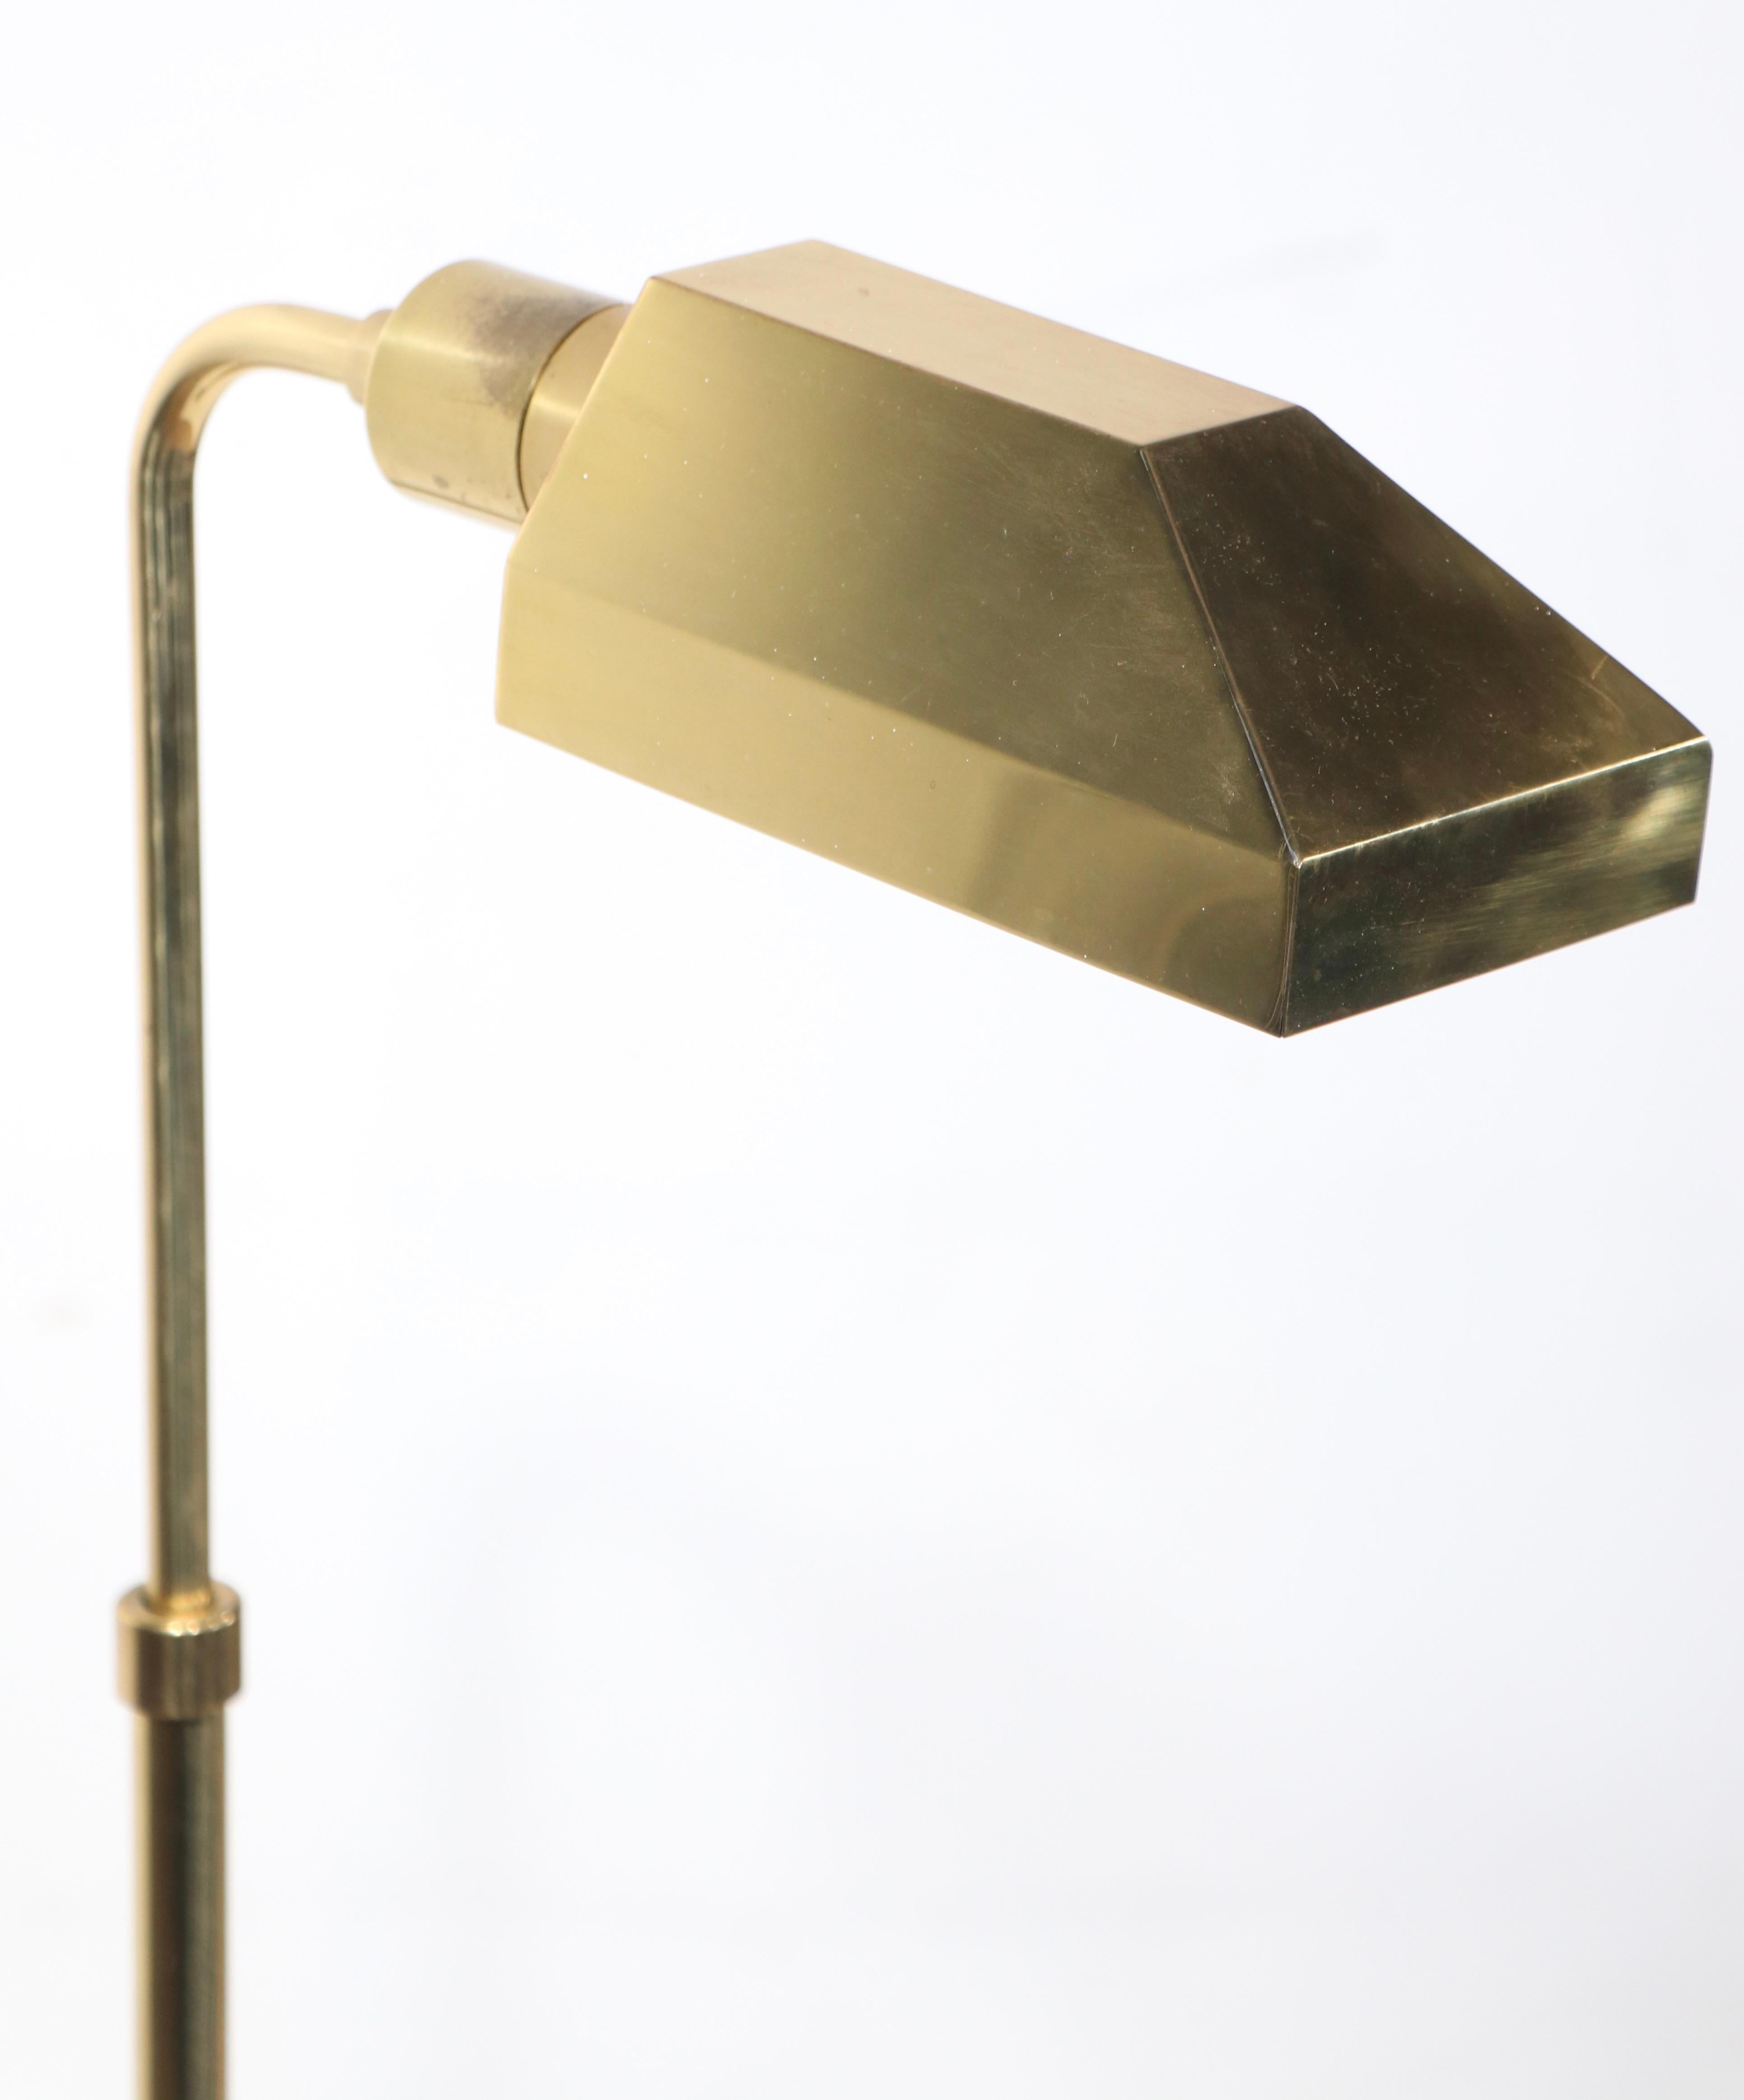 Classic Post Modern reinterpretation of the antique Pharmacy Lamp form, attributed Koch & Lowey circa 1970's. The lamp is constructed of solid brass, having an angular hood shade which swivels on the socket, to direct to light, the vertical pole is